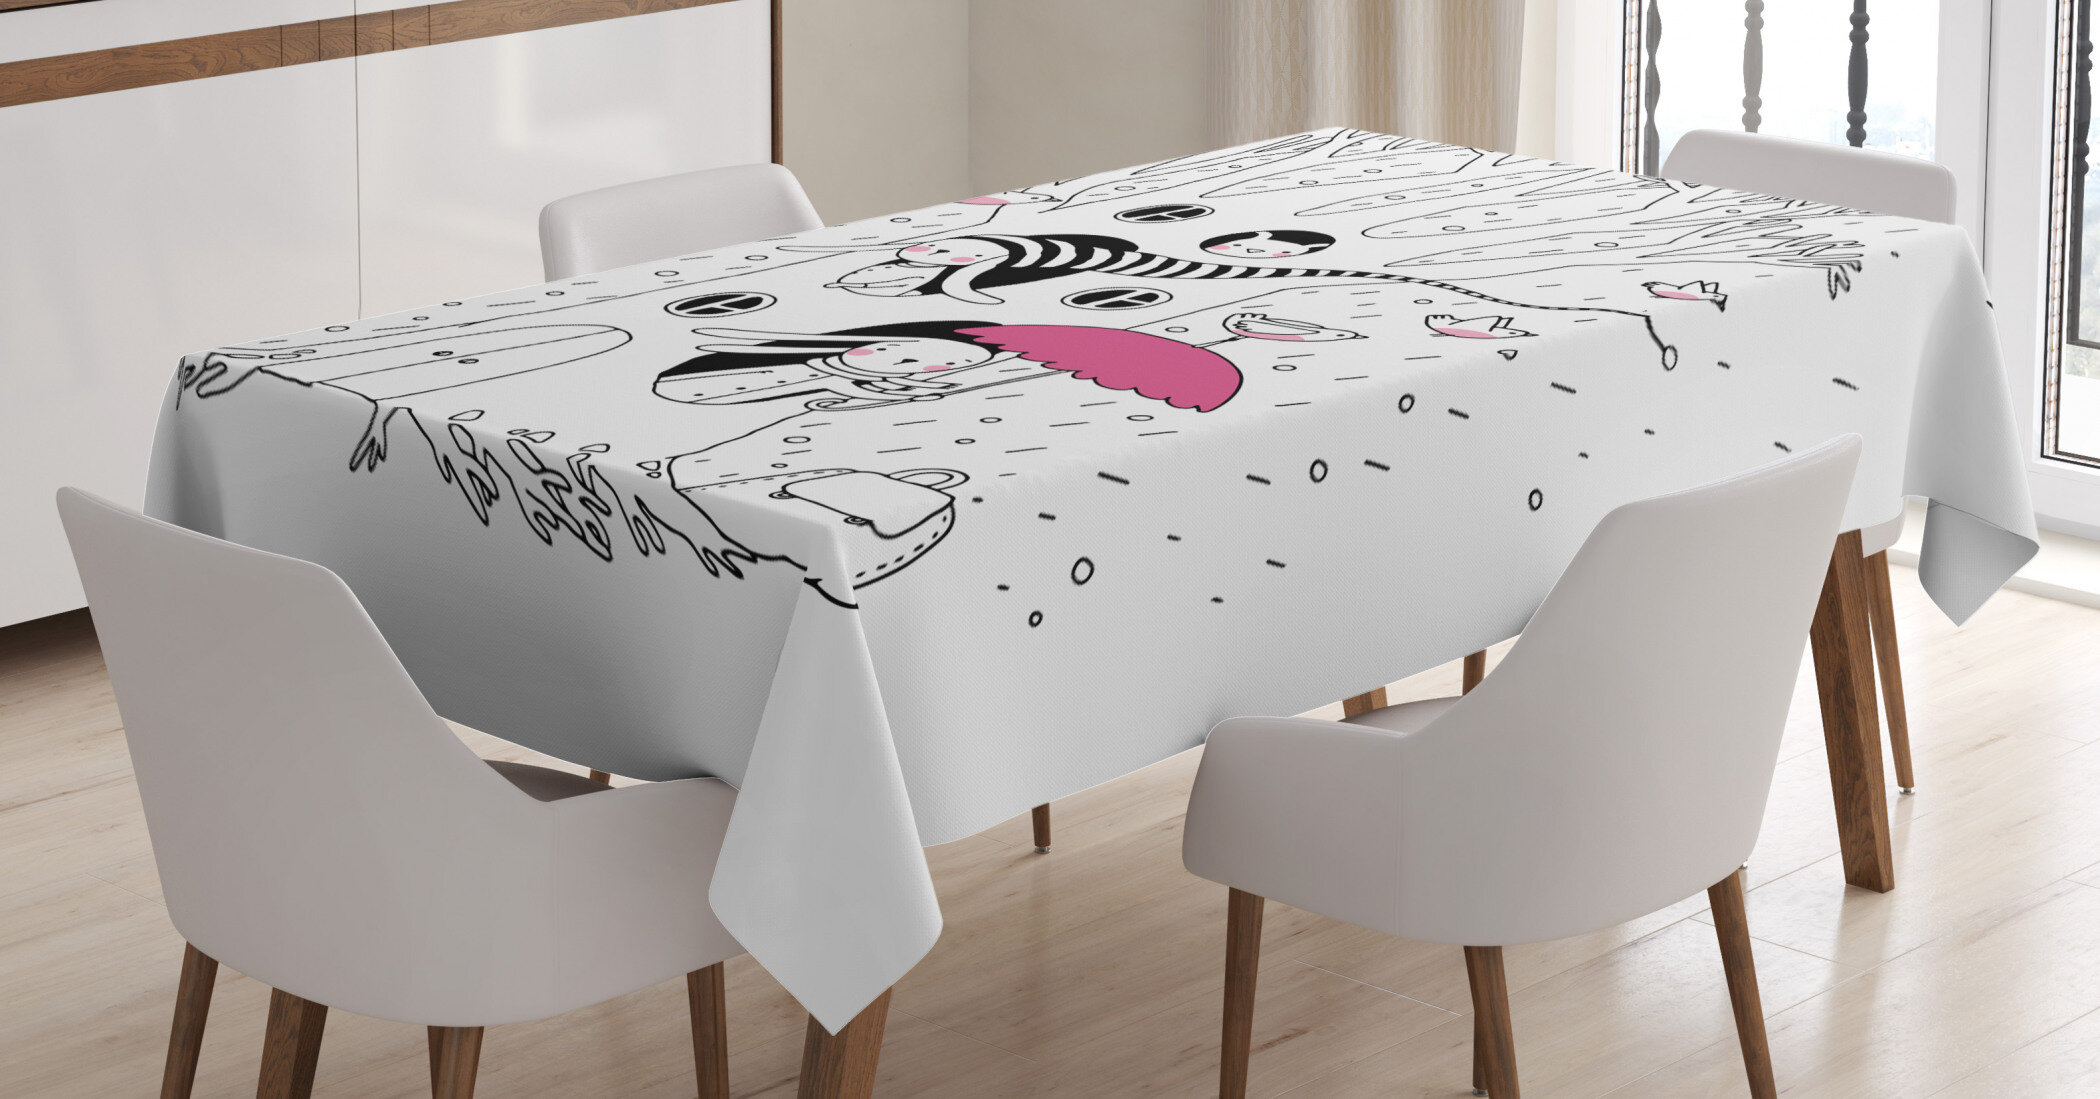 Details about   Ambesonne Abstract Surreal Tablecloth Table Cover for Dining Room Kitchen 